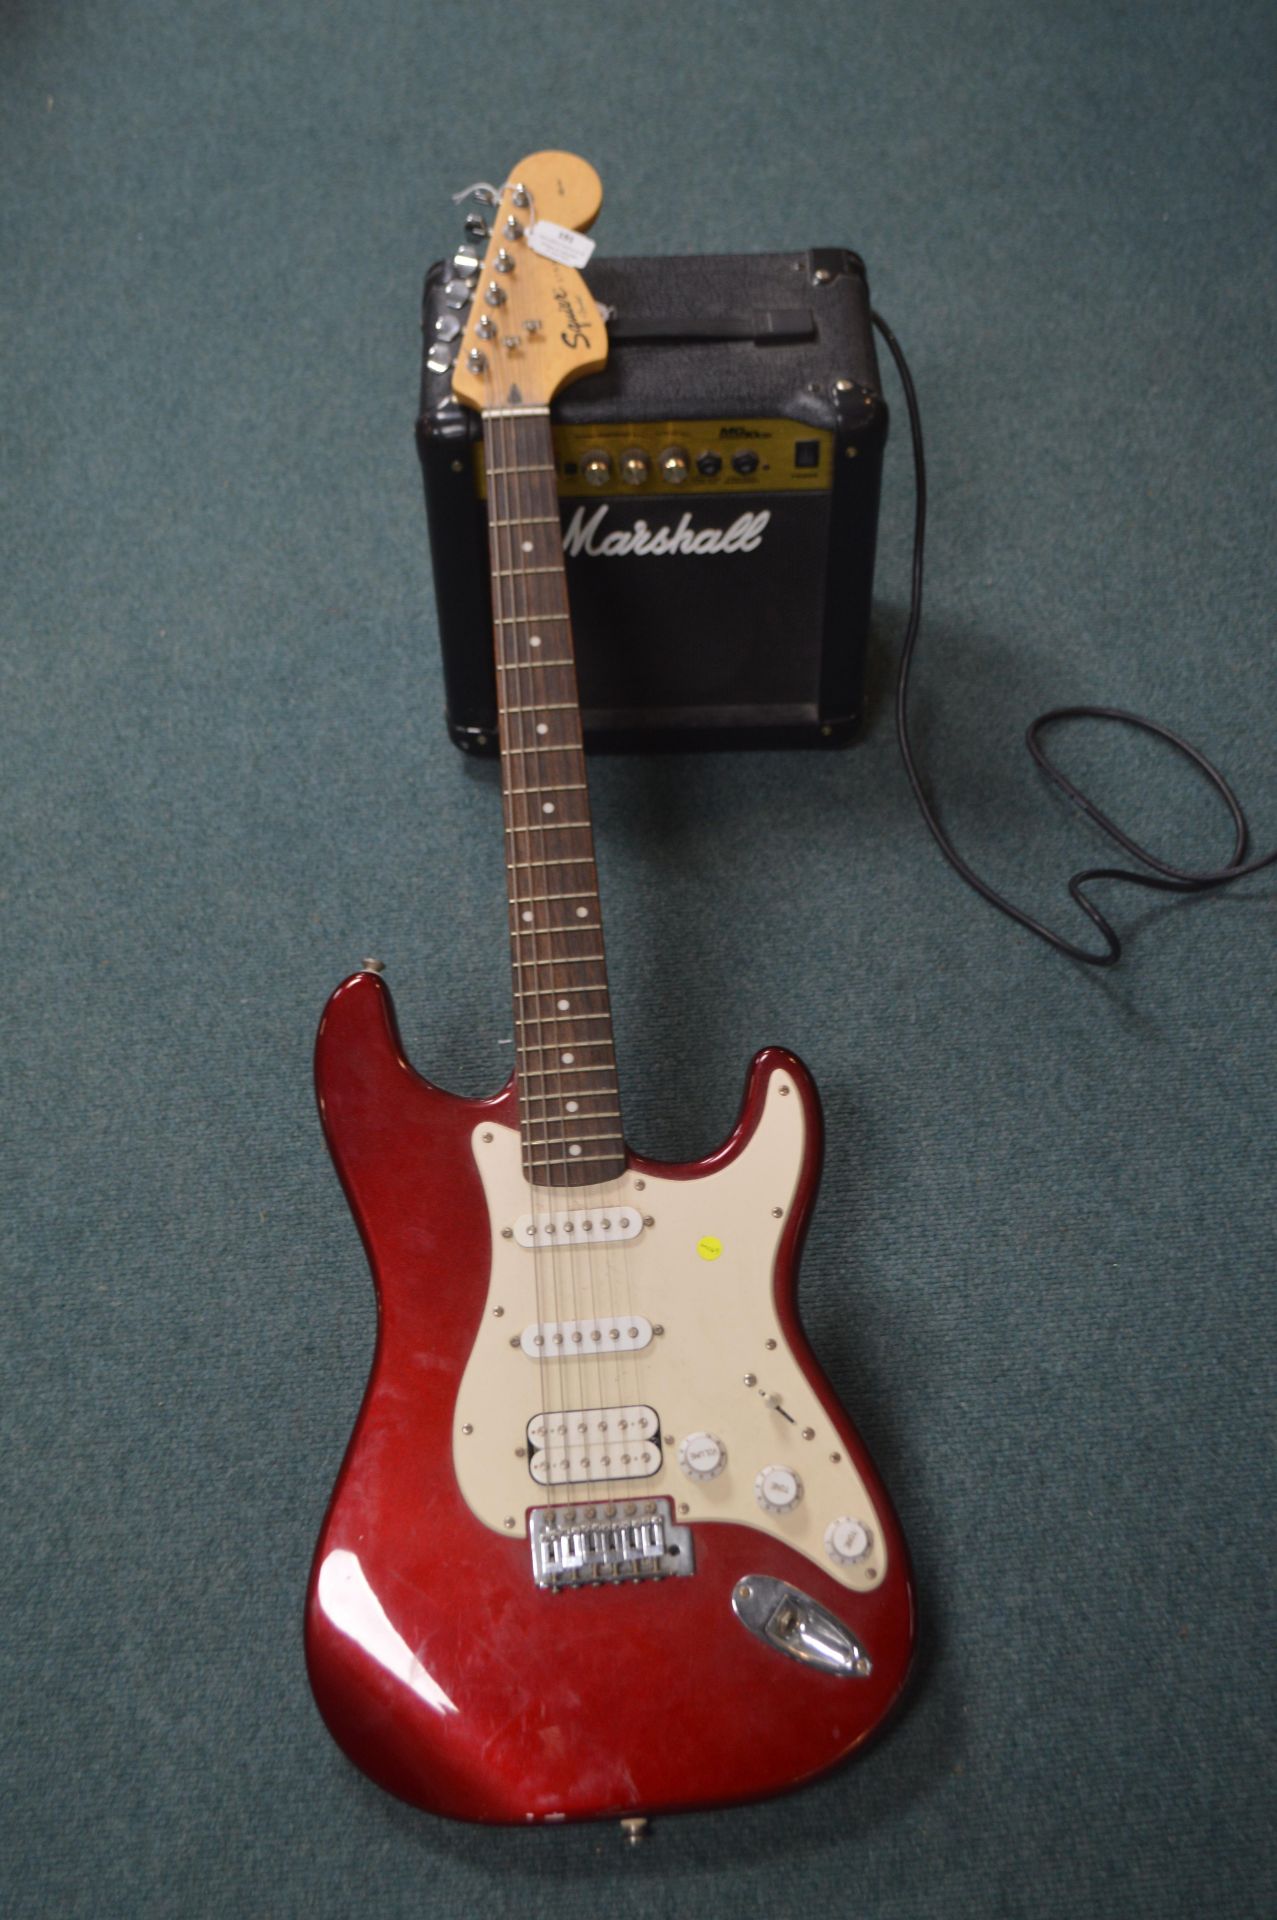 Fender Squier Stratocaster Guitar made in Indonesian with Marshall MD10CD AMP